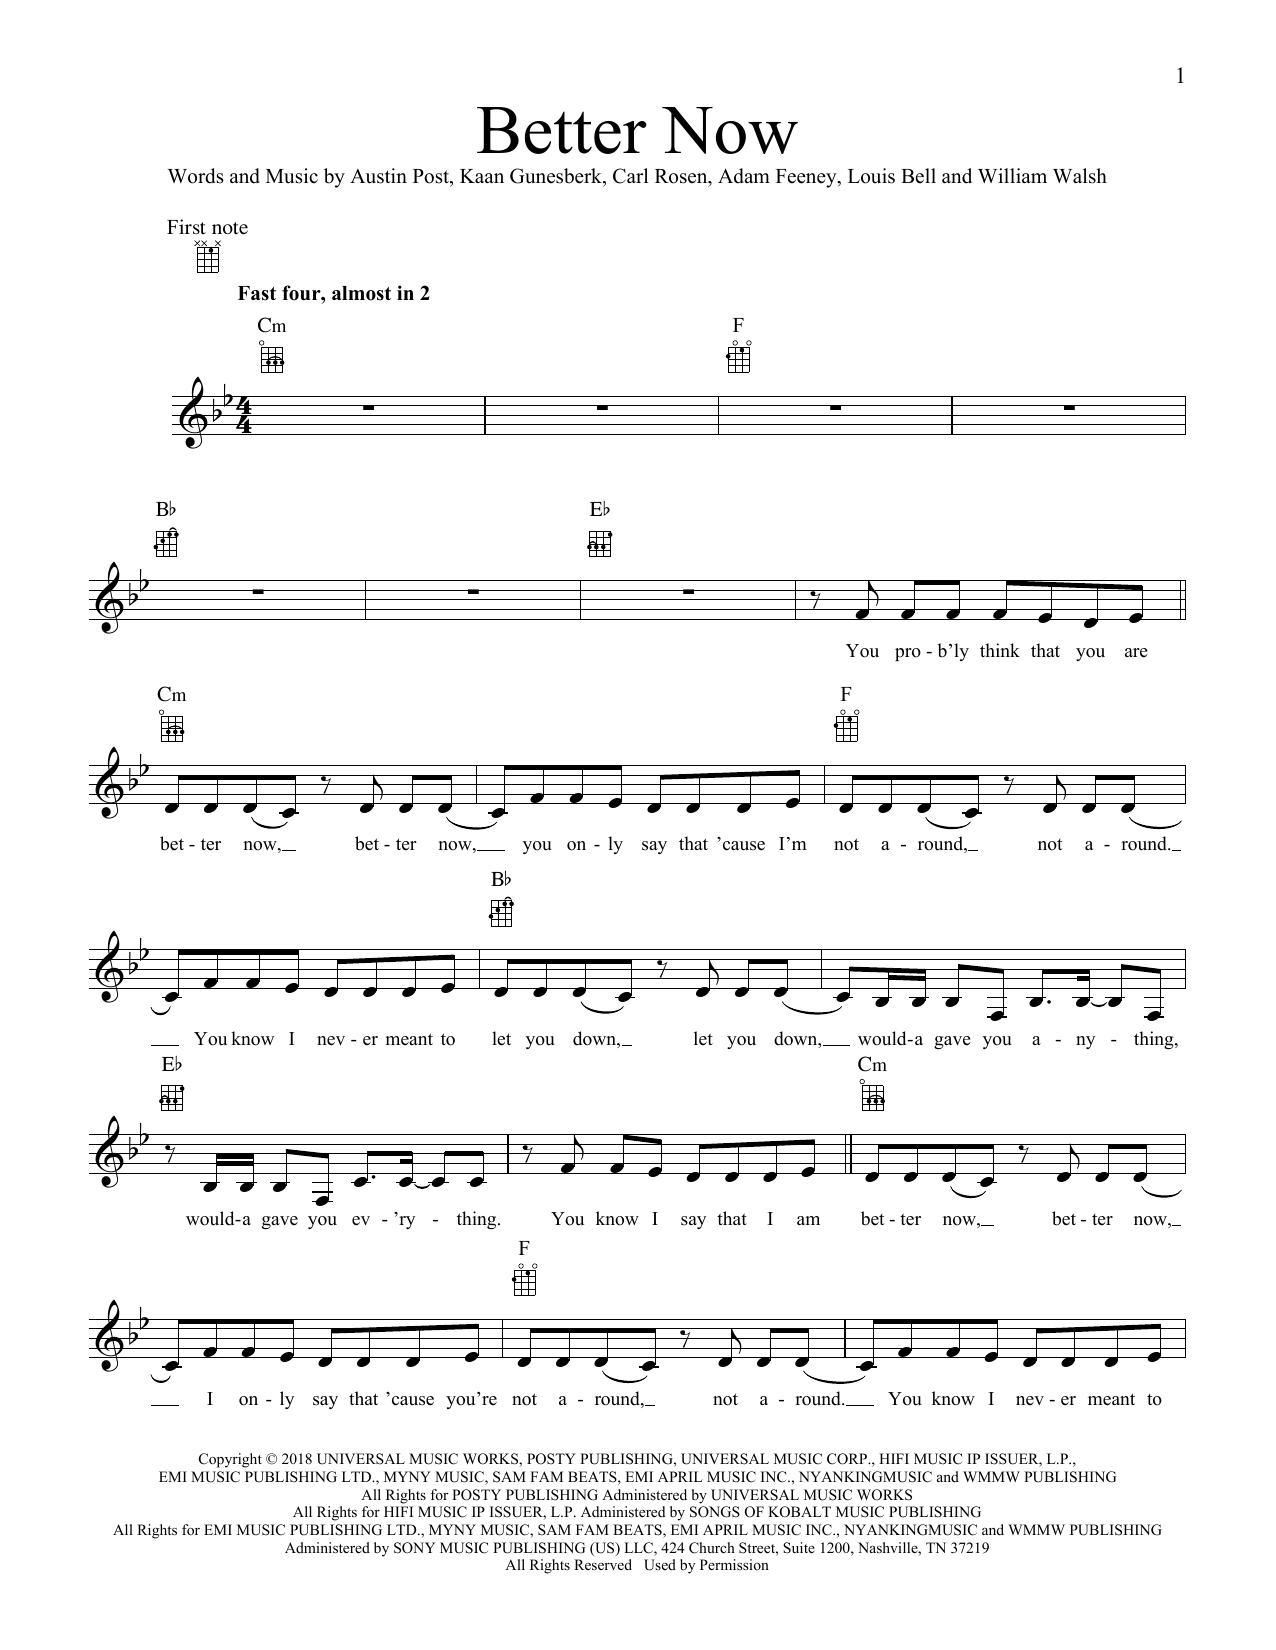 Post Malone Better Now sheet music notes printable PDF score